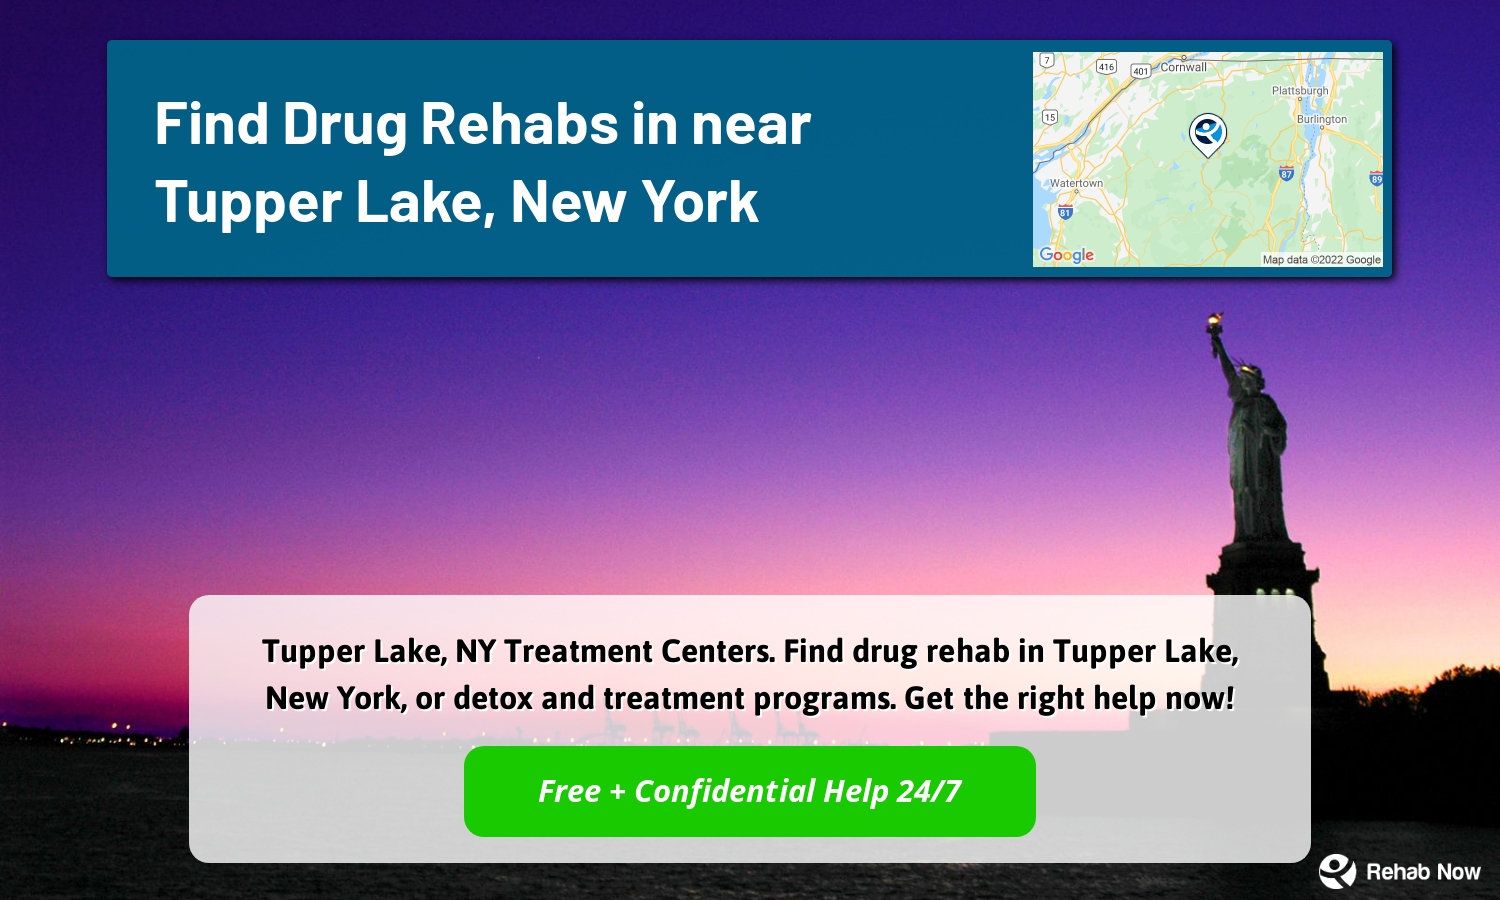 Tupper Lake, NY Treatment Centers. Find drug rehab in Tupper Lake, New York, or detox and treatment programs. Get the right help now!